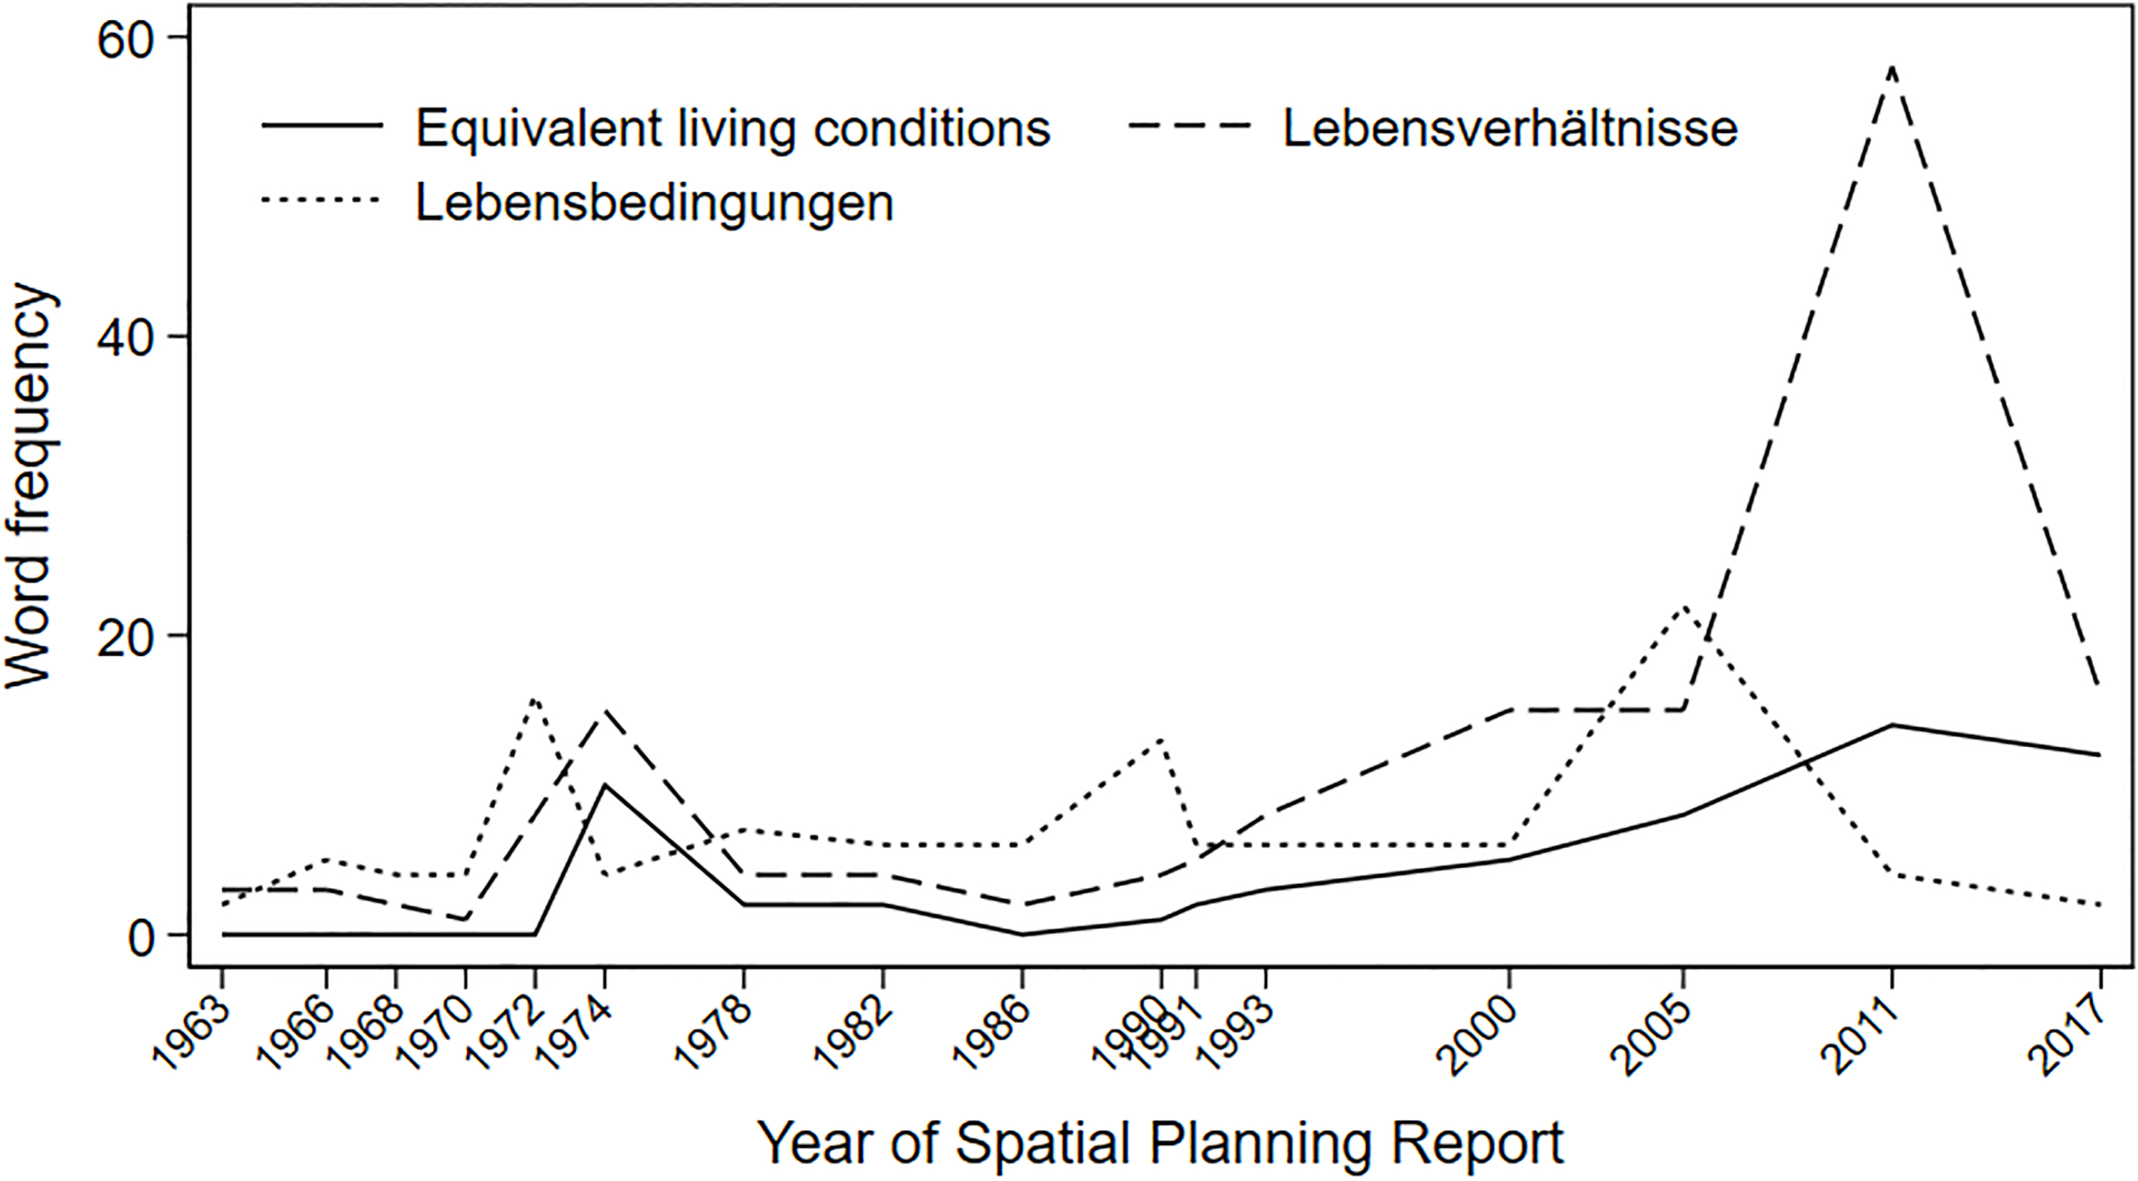 Frequencies of the phrase ‘equivalent living conditions’ and related terms in Spatial Planning Reports (1963–2017).